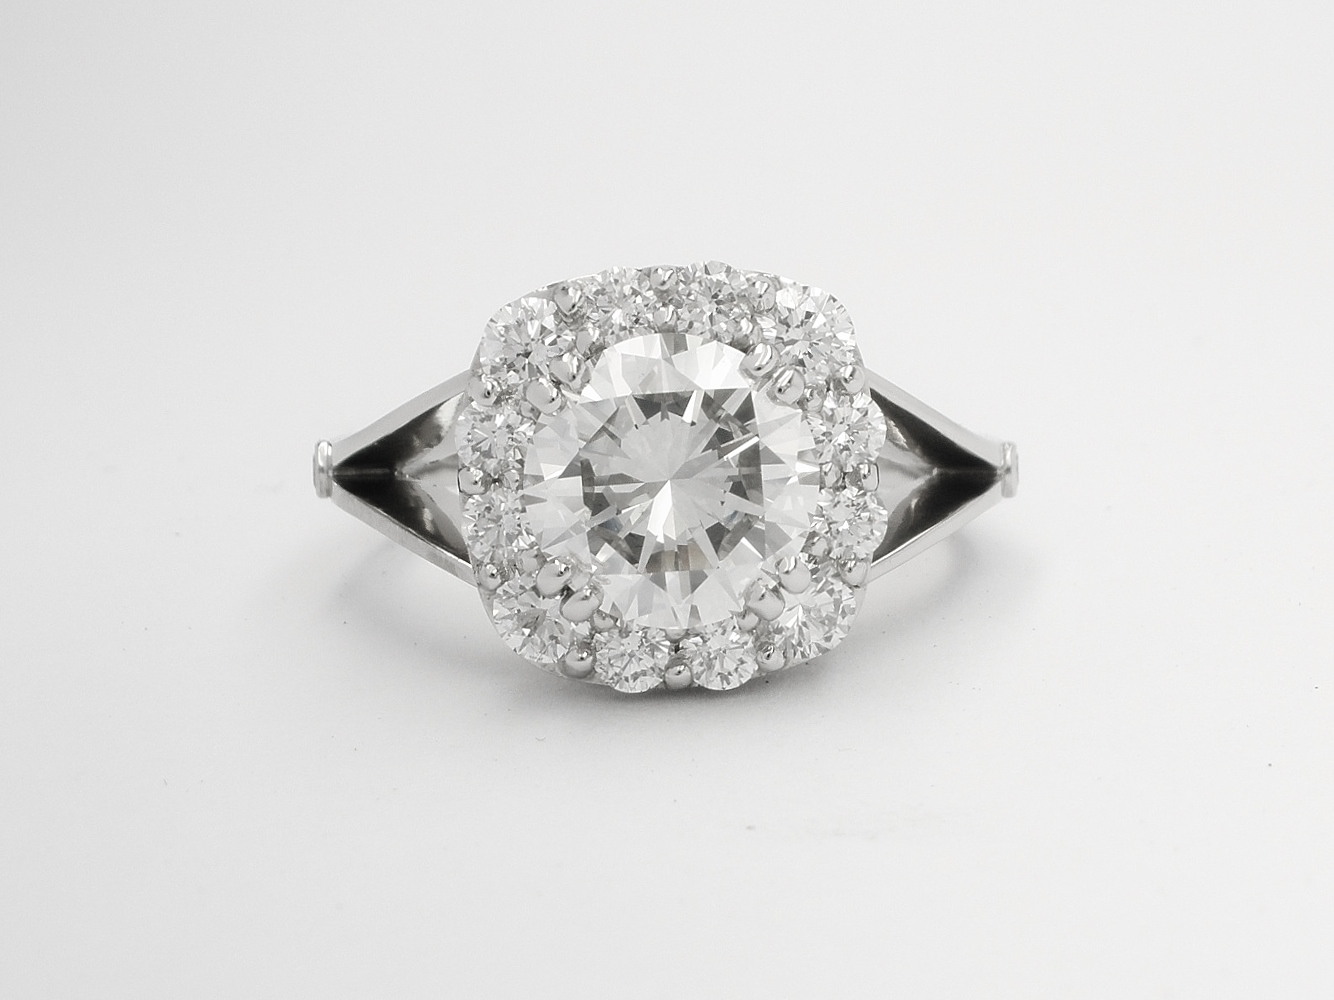 Cushion shaped diamond cluster platinum ring with split shoulder created from 13 round brilliant cut diamonds & diamond set scroll effect round the setting sides. Centre stone 1.90ct 'G' colour.